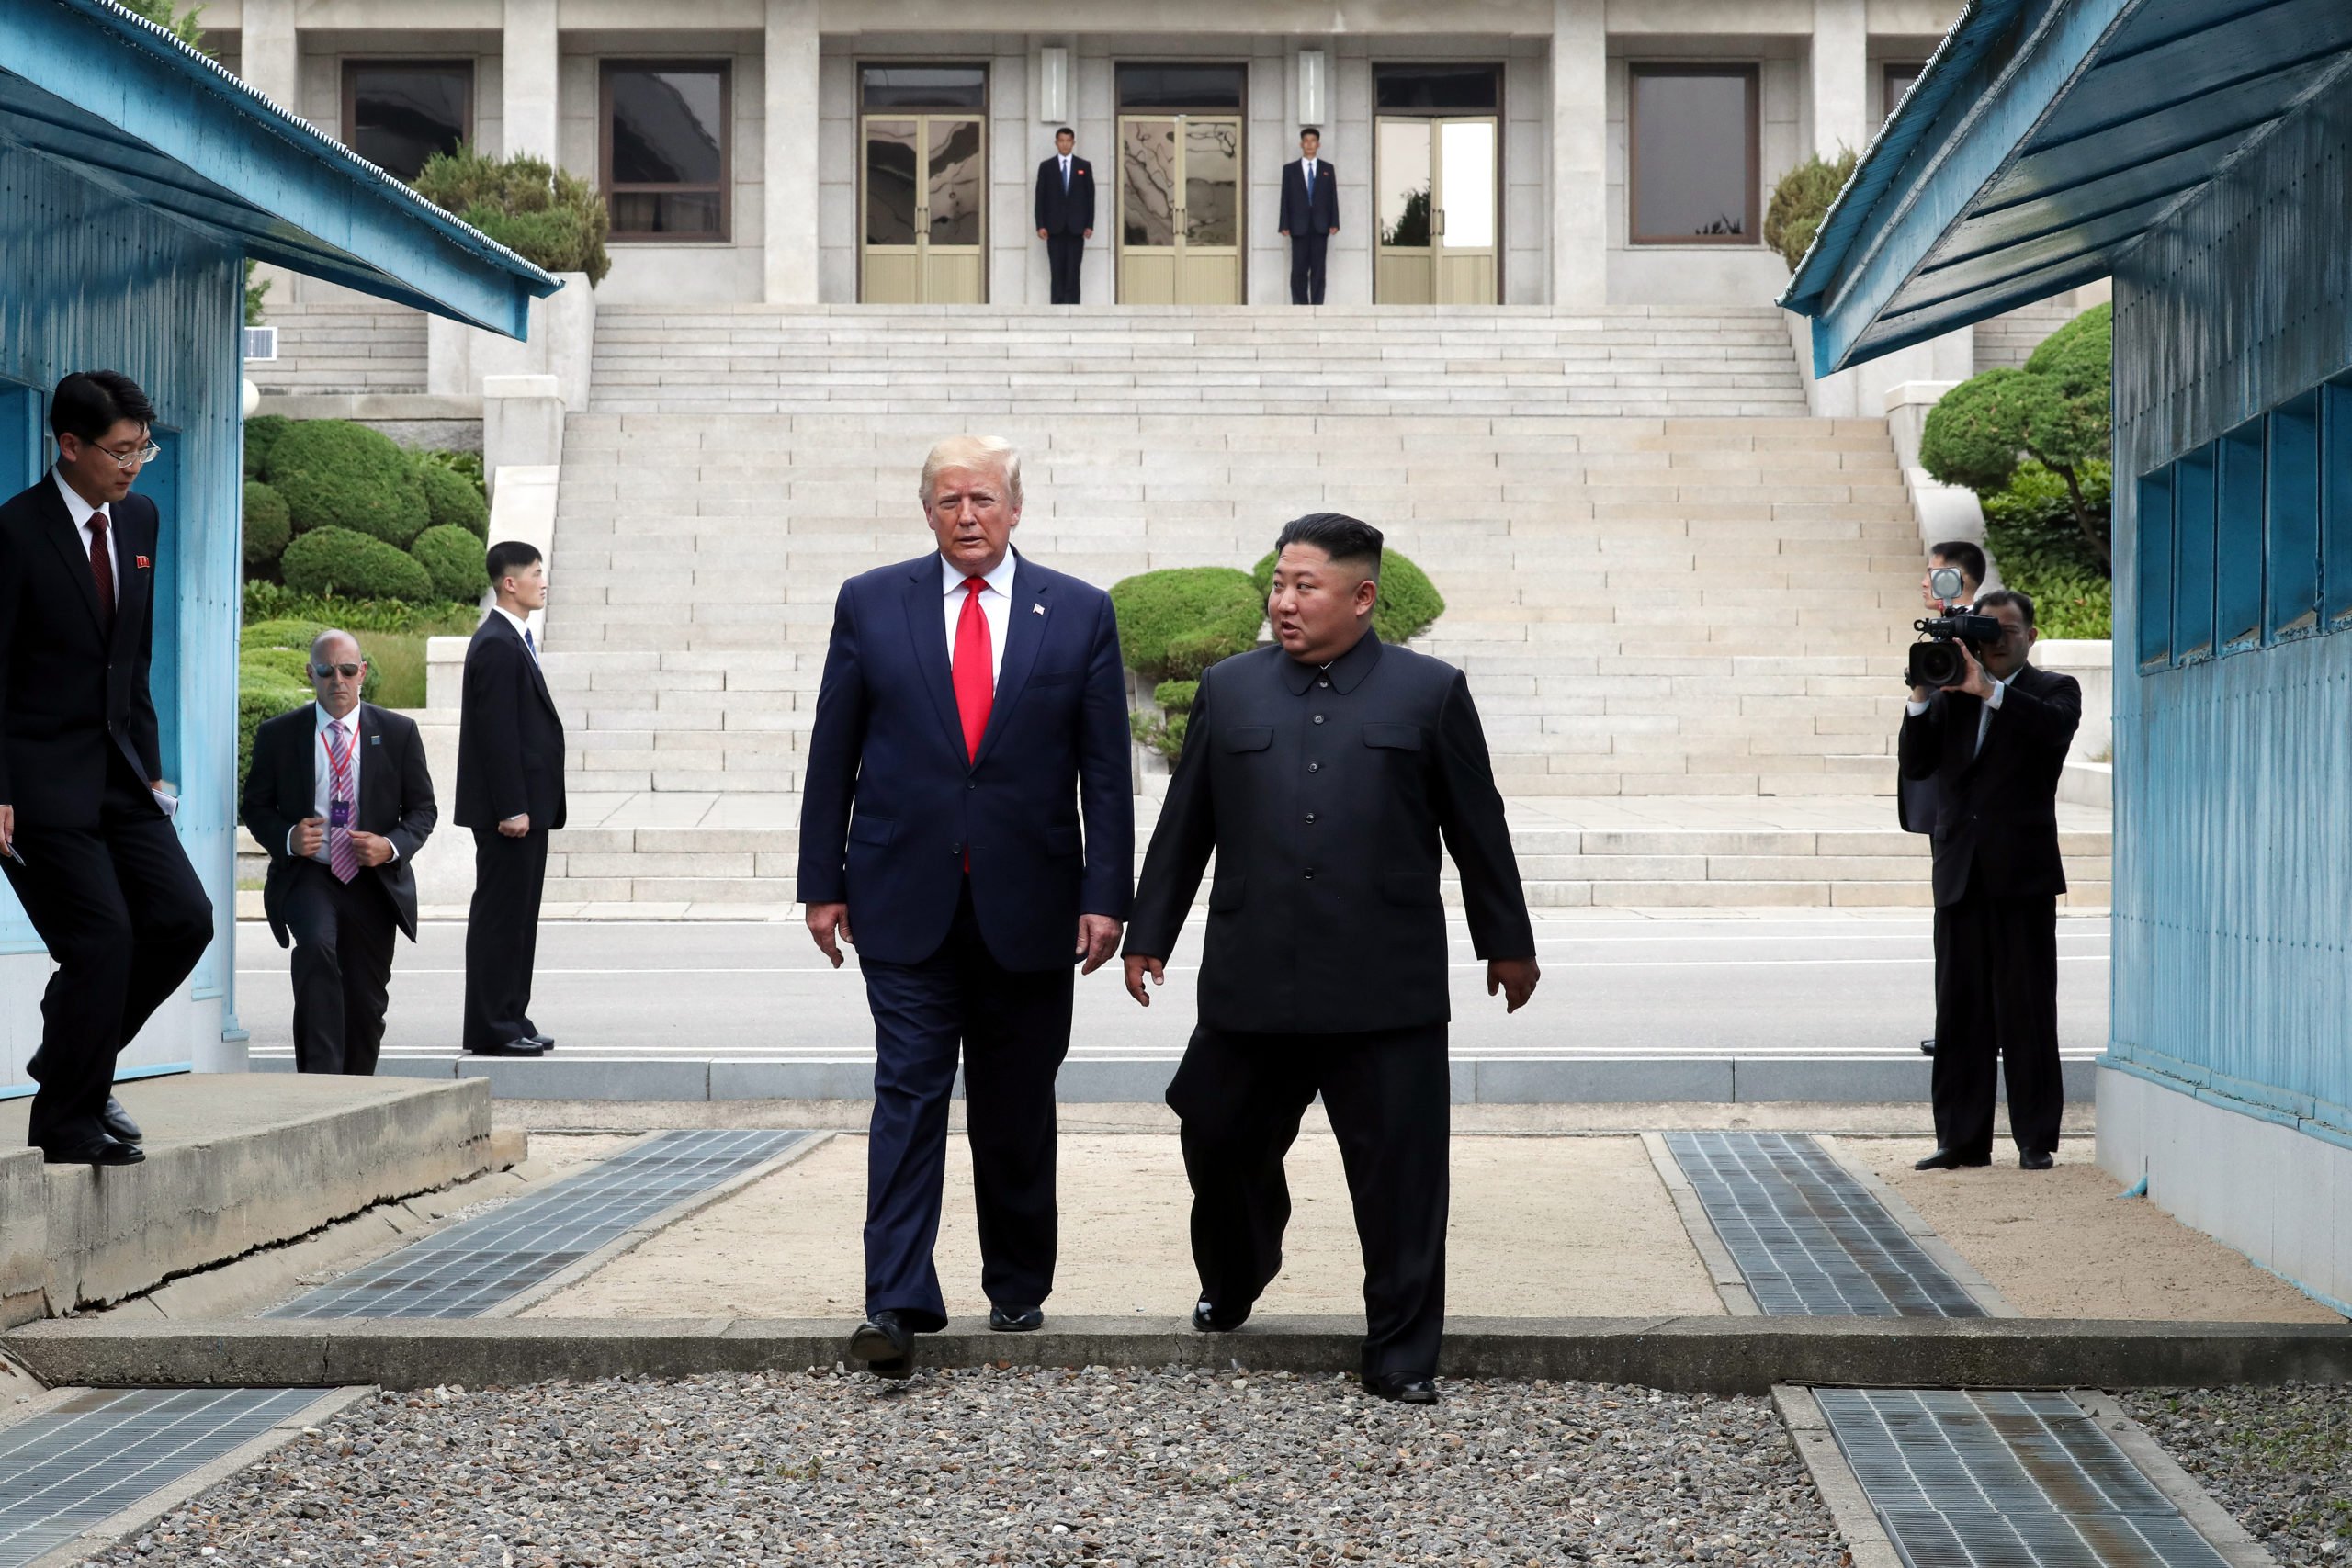 North Korean leader Kim Jong Un and U.S. President Donald Trump inside the demilitarized zone separating the South and North Korea on June 30, 2019 in Panmunjom, South Korea. (Dong-A Ilbo/Handout/Getty Images)